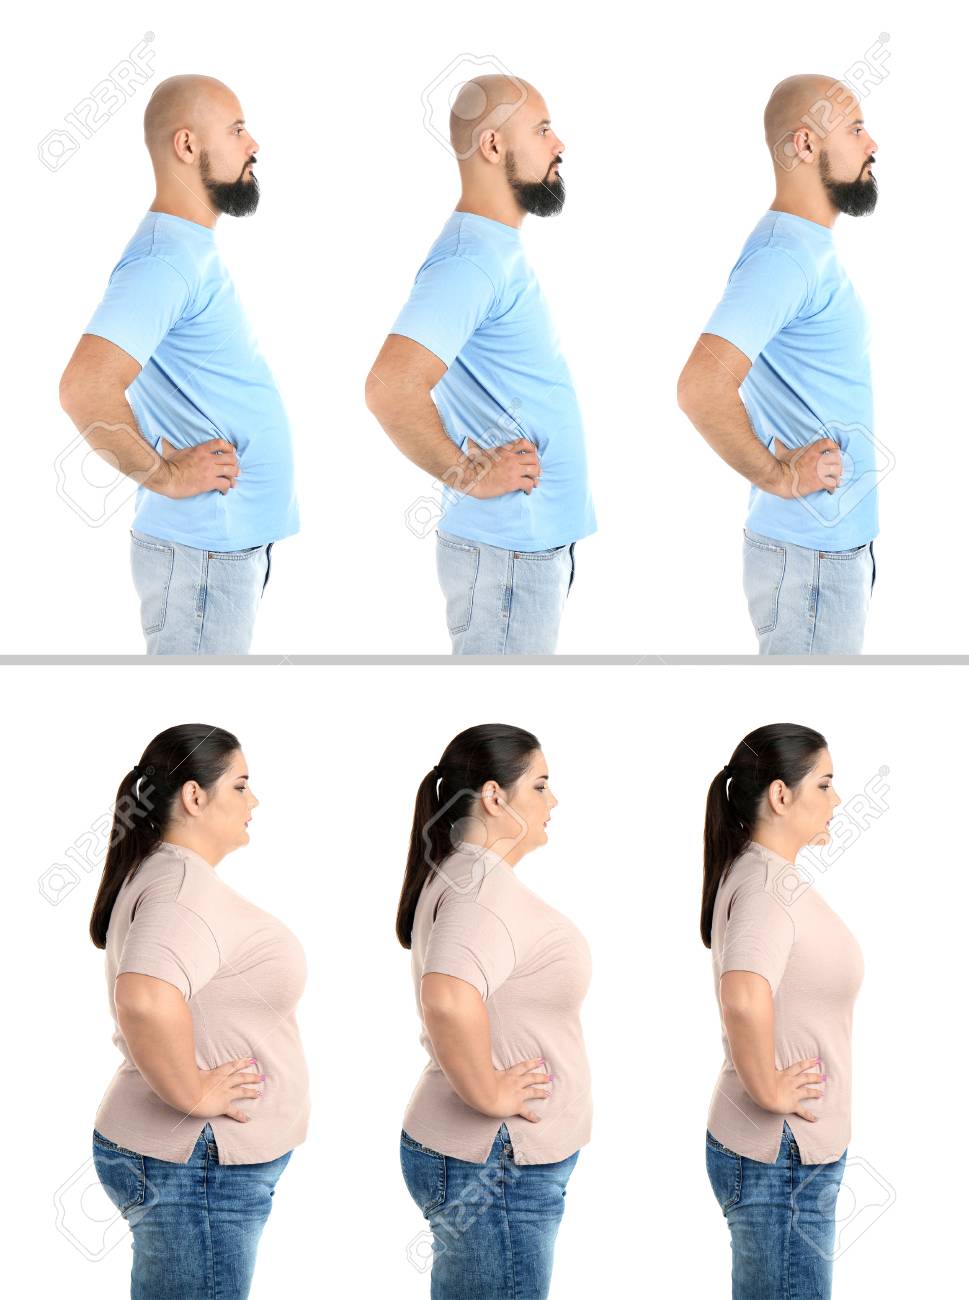 Overweight People Before And After Weight Loss On White Background